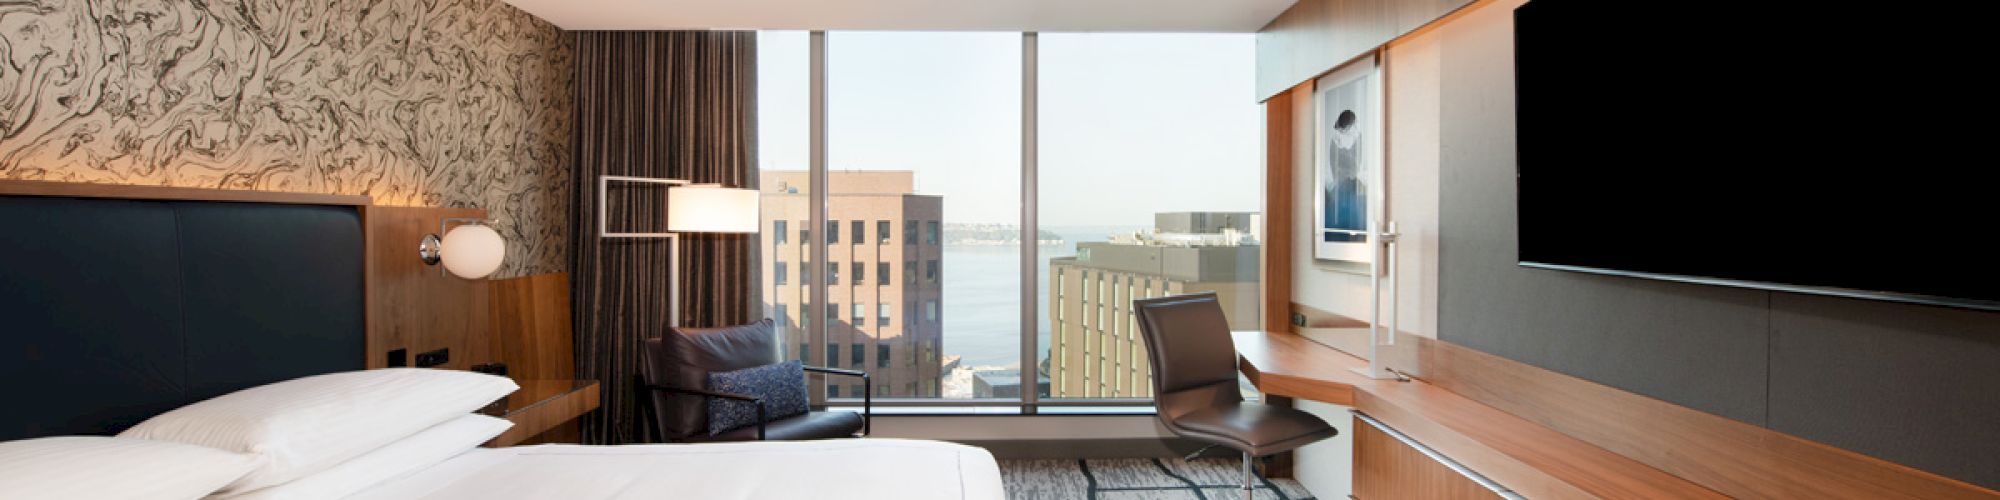 The image shows a modern hotel room with a large bed, desk, chair, wall-mounted TV, and a city view through large windows.